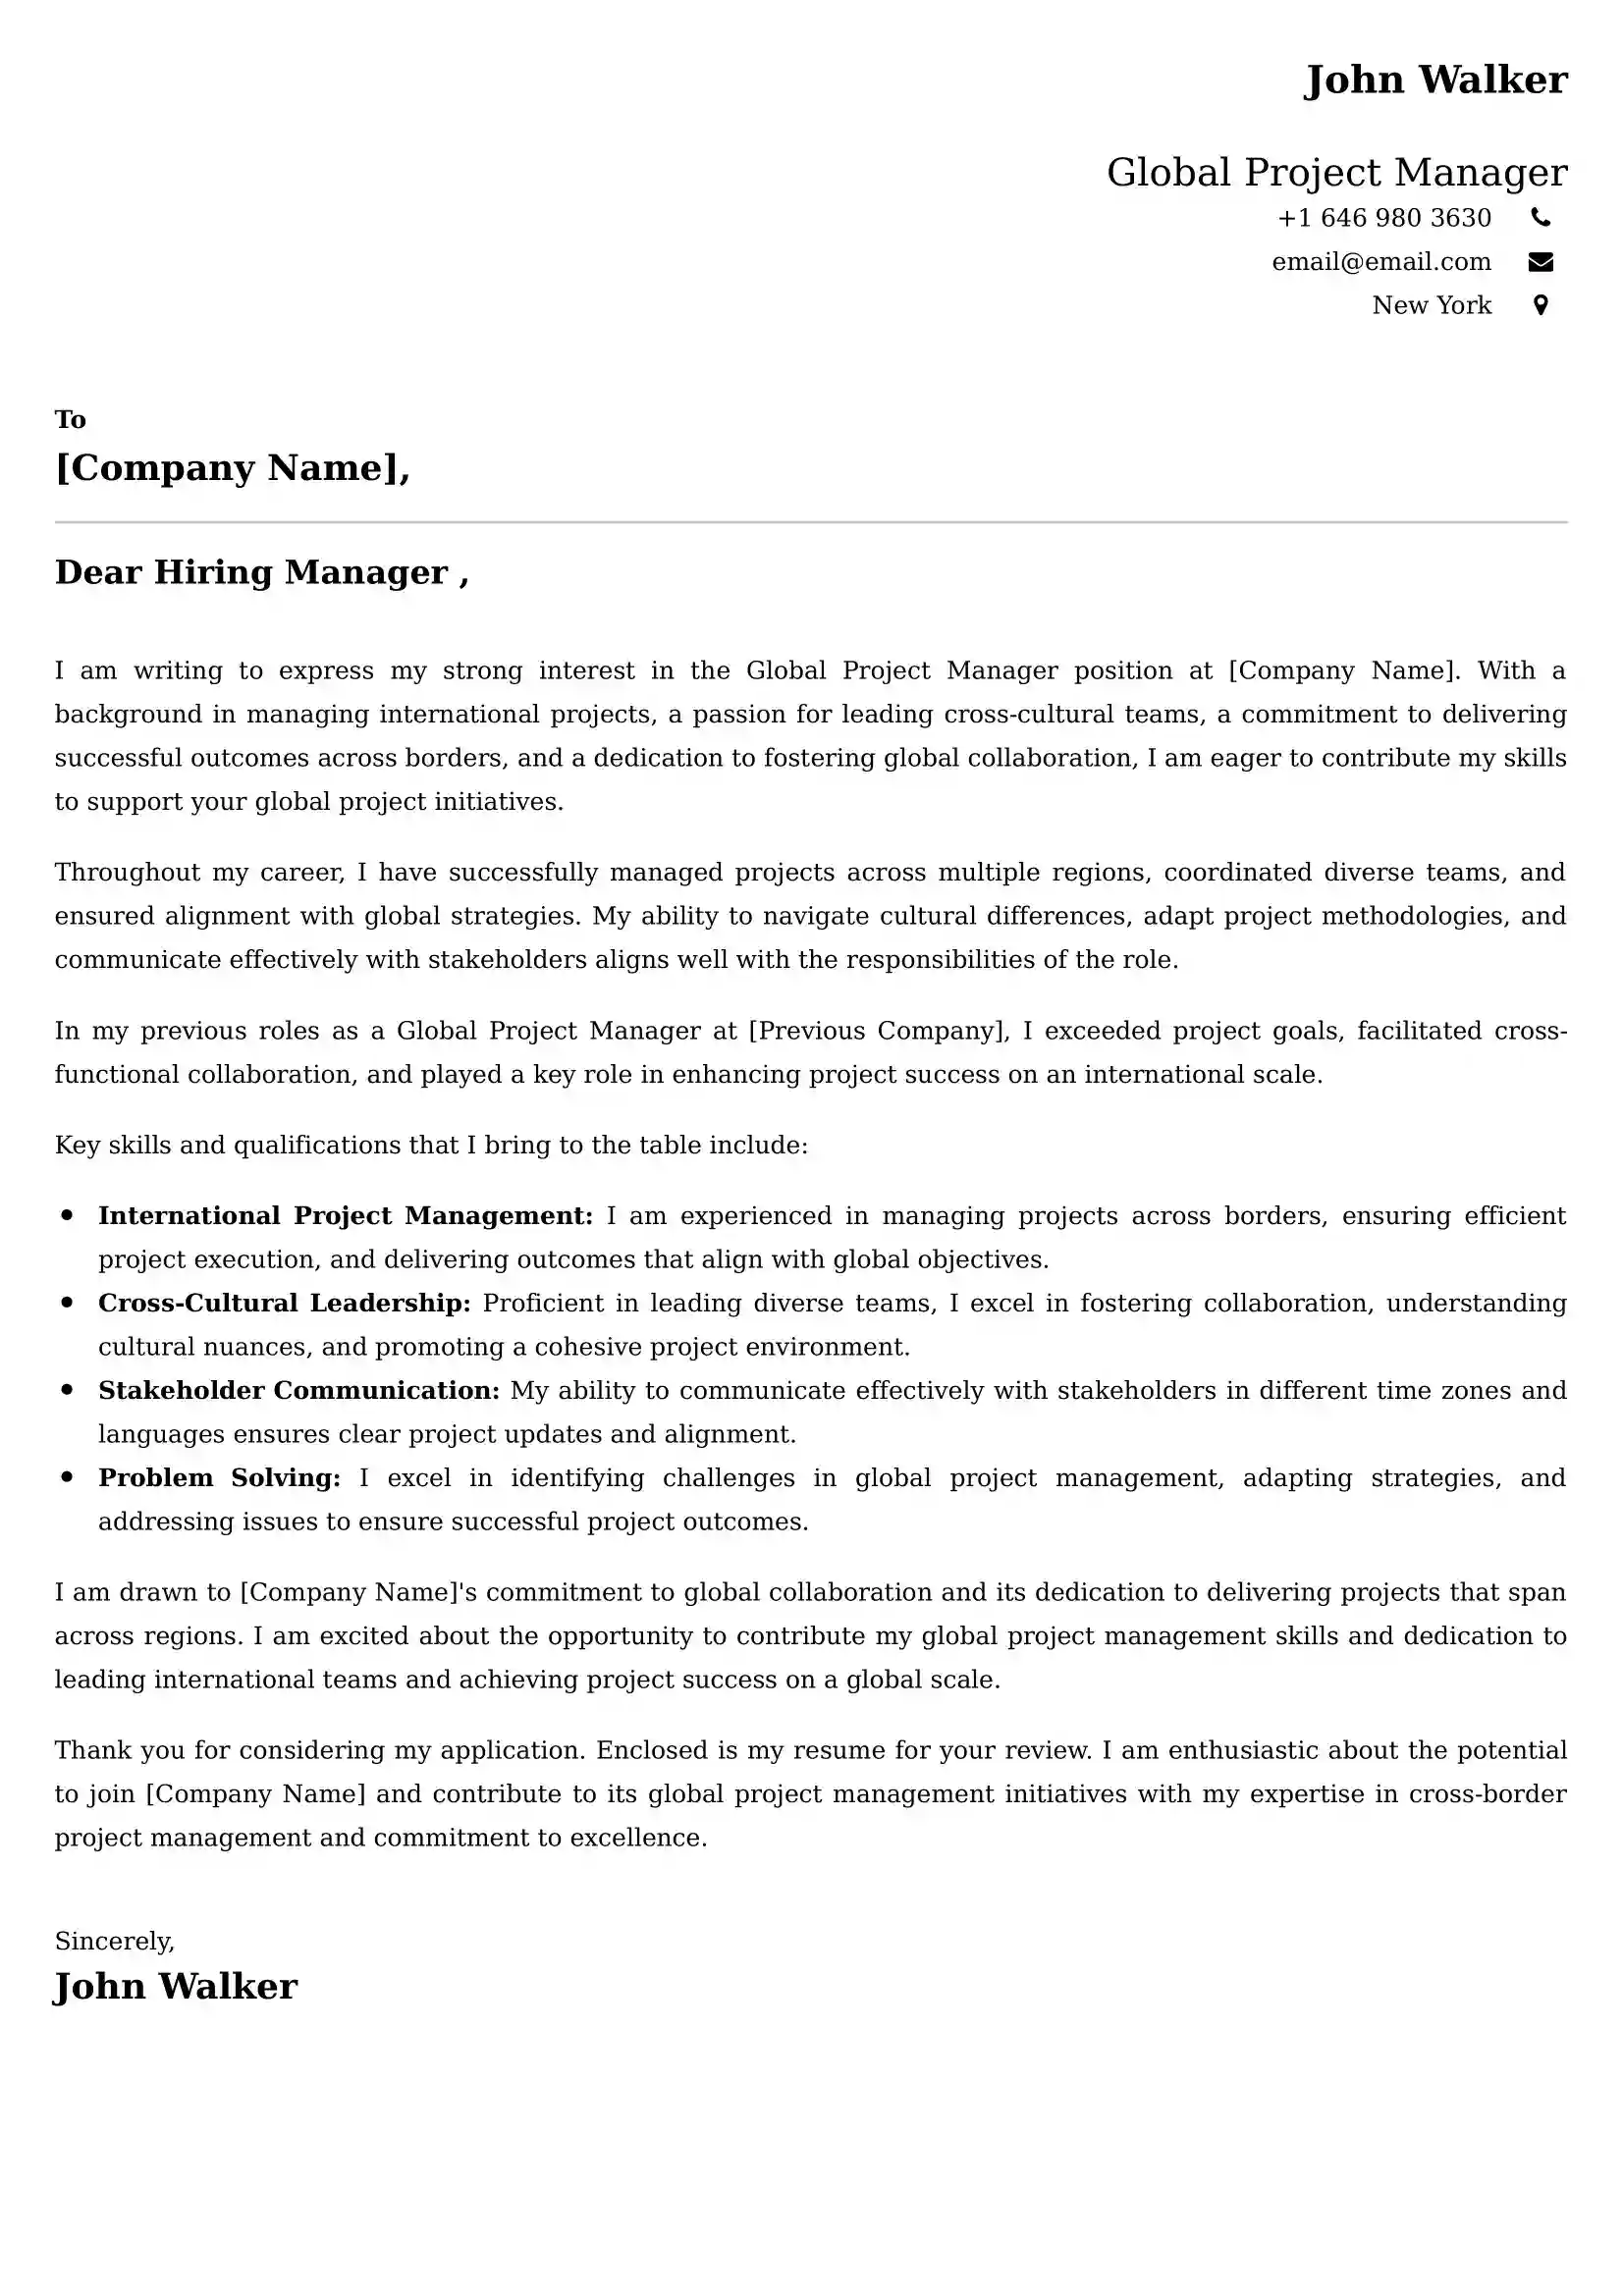 Global Project Manager Cover Letter Examples Australia